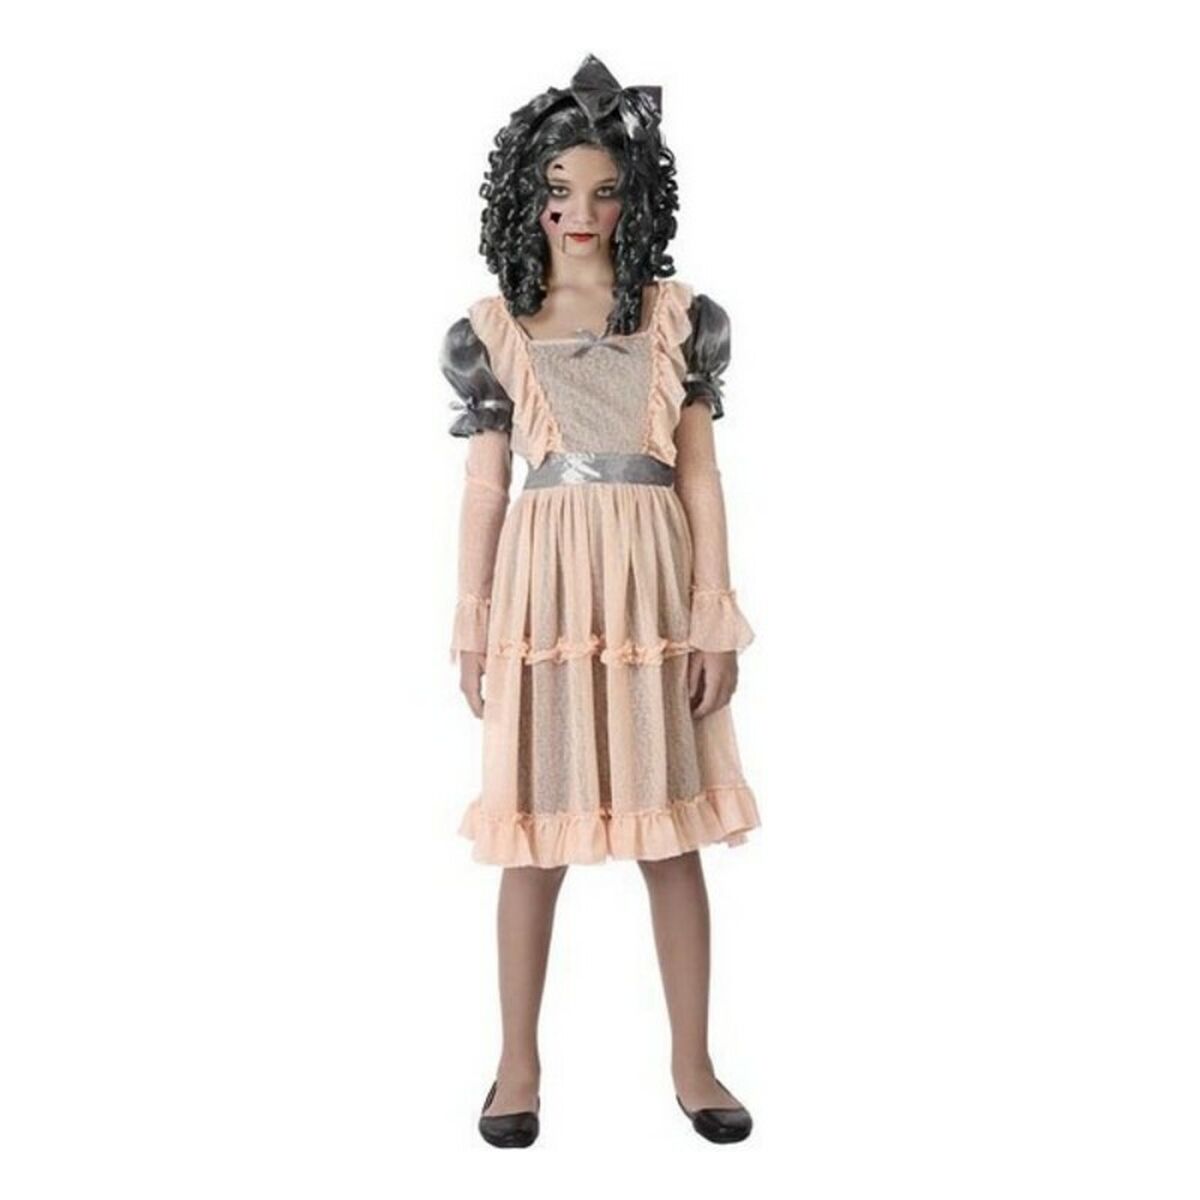 Costume for Children Zombie doll